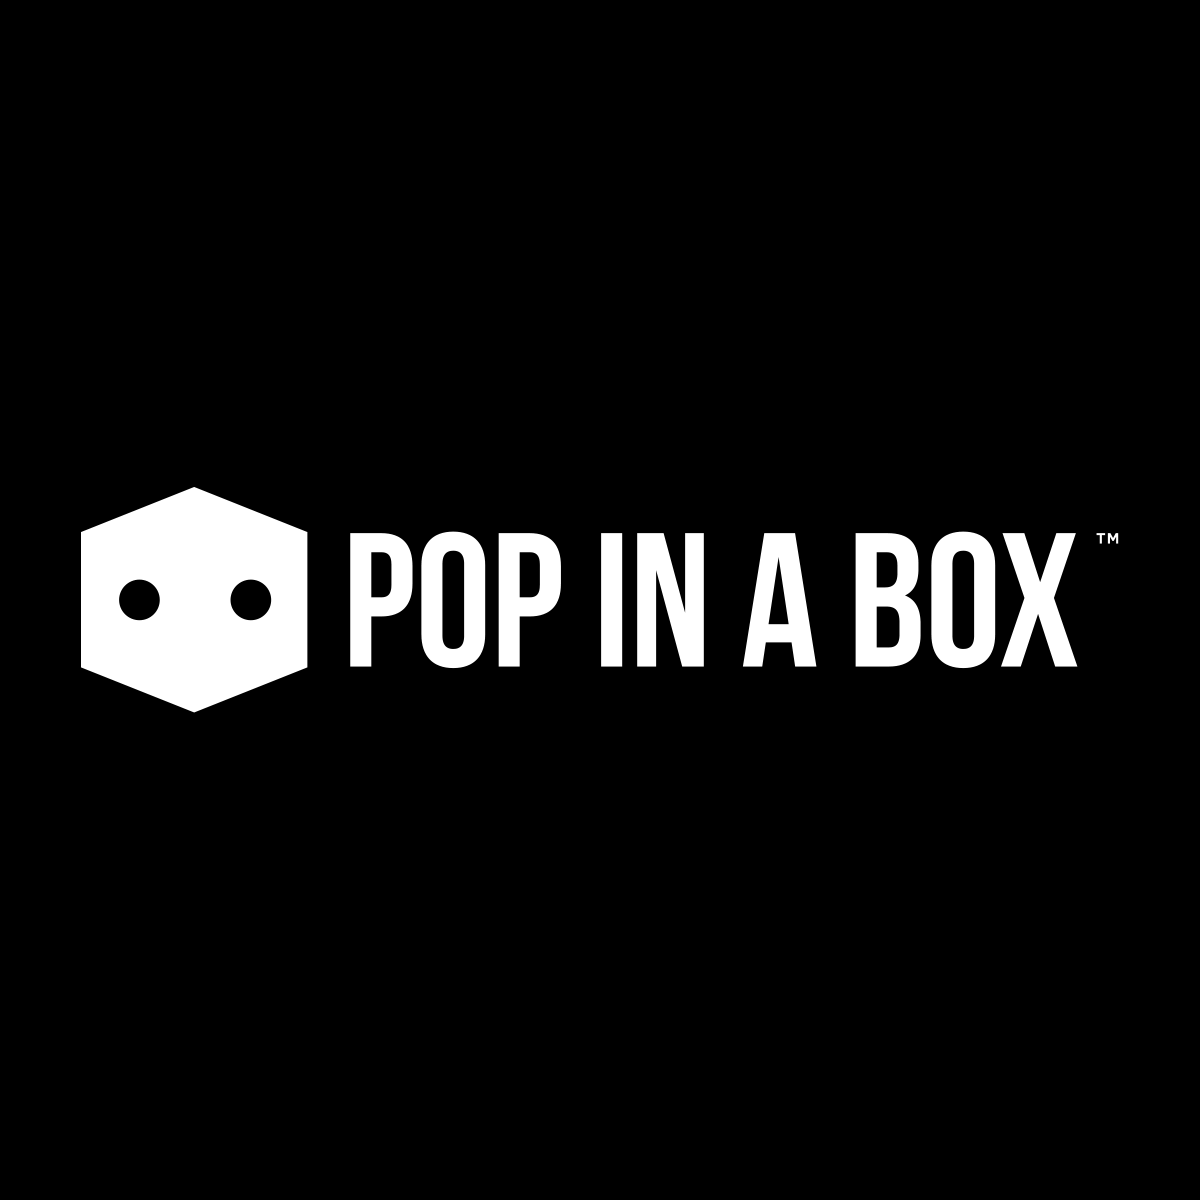 10% Off With Pop In A Box UK Discount Code